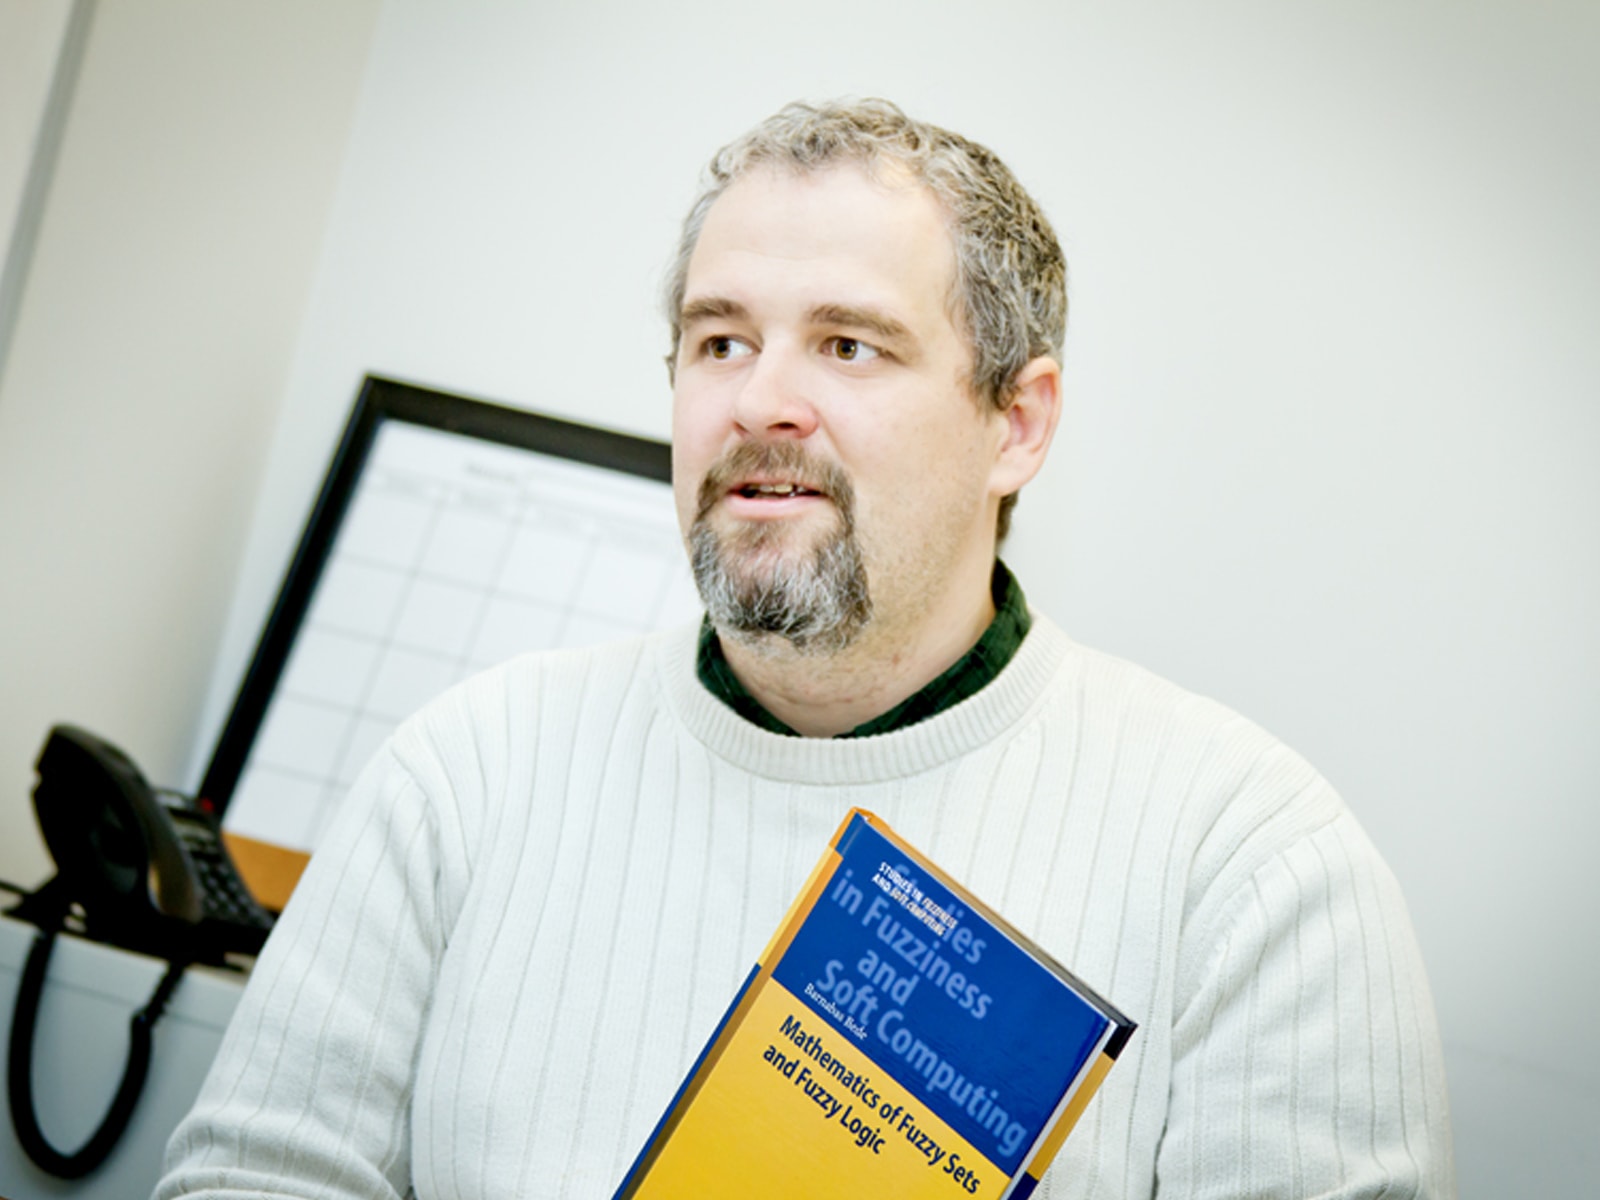 DigiPen mathematics professor Dr. Barnabas Bede holding a copy of his book, Mathematics of Fuzzy Sets and Fuzzy Logic